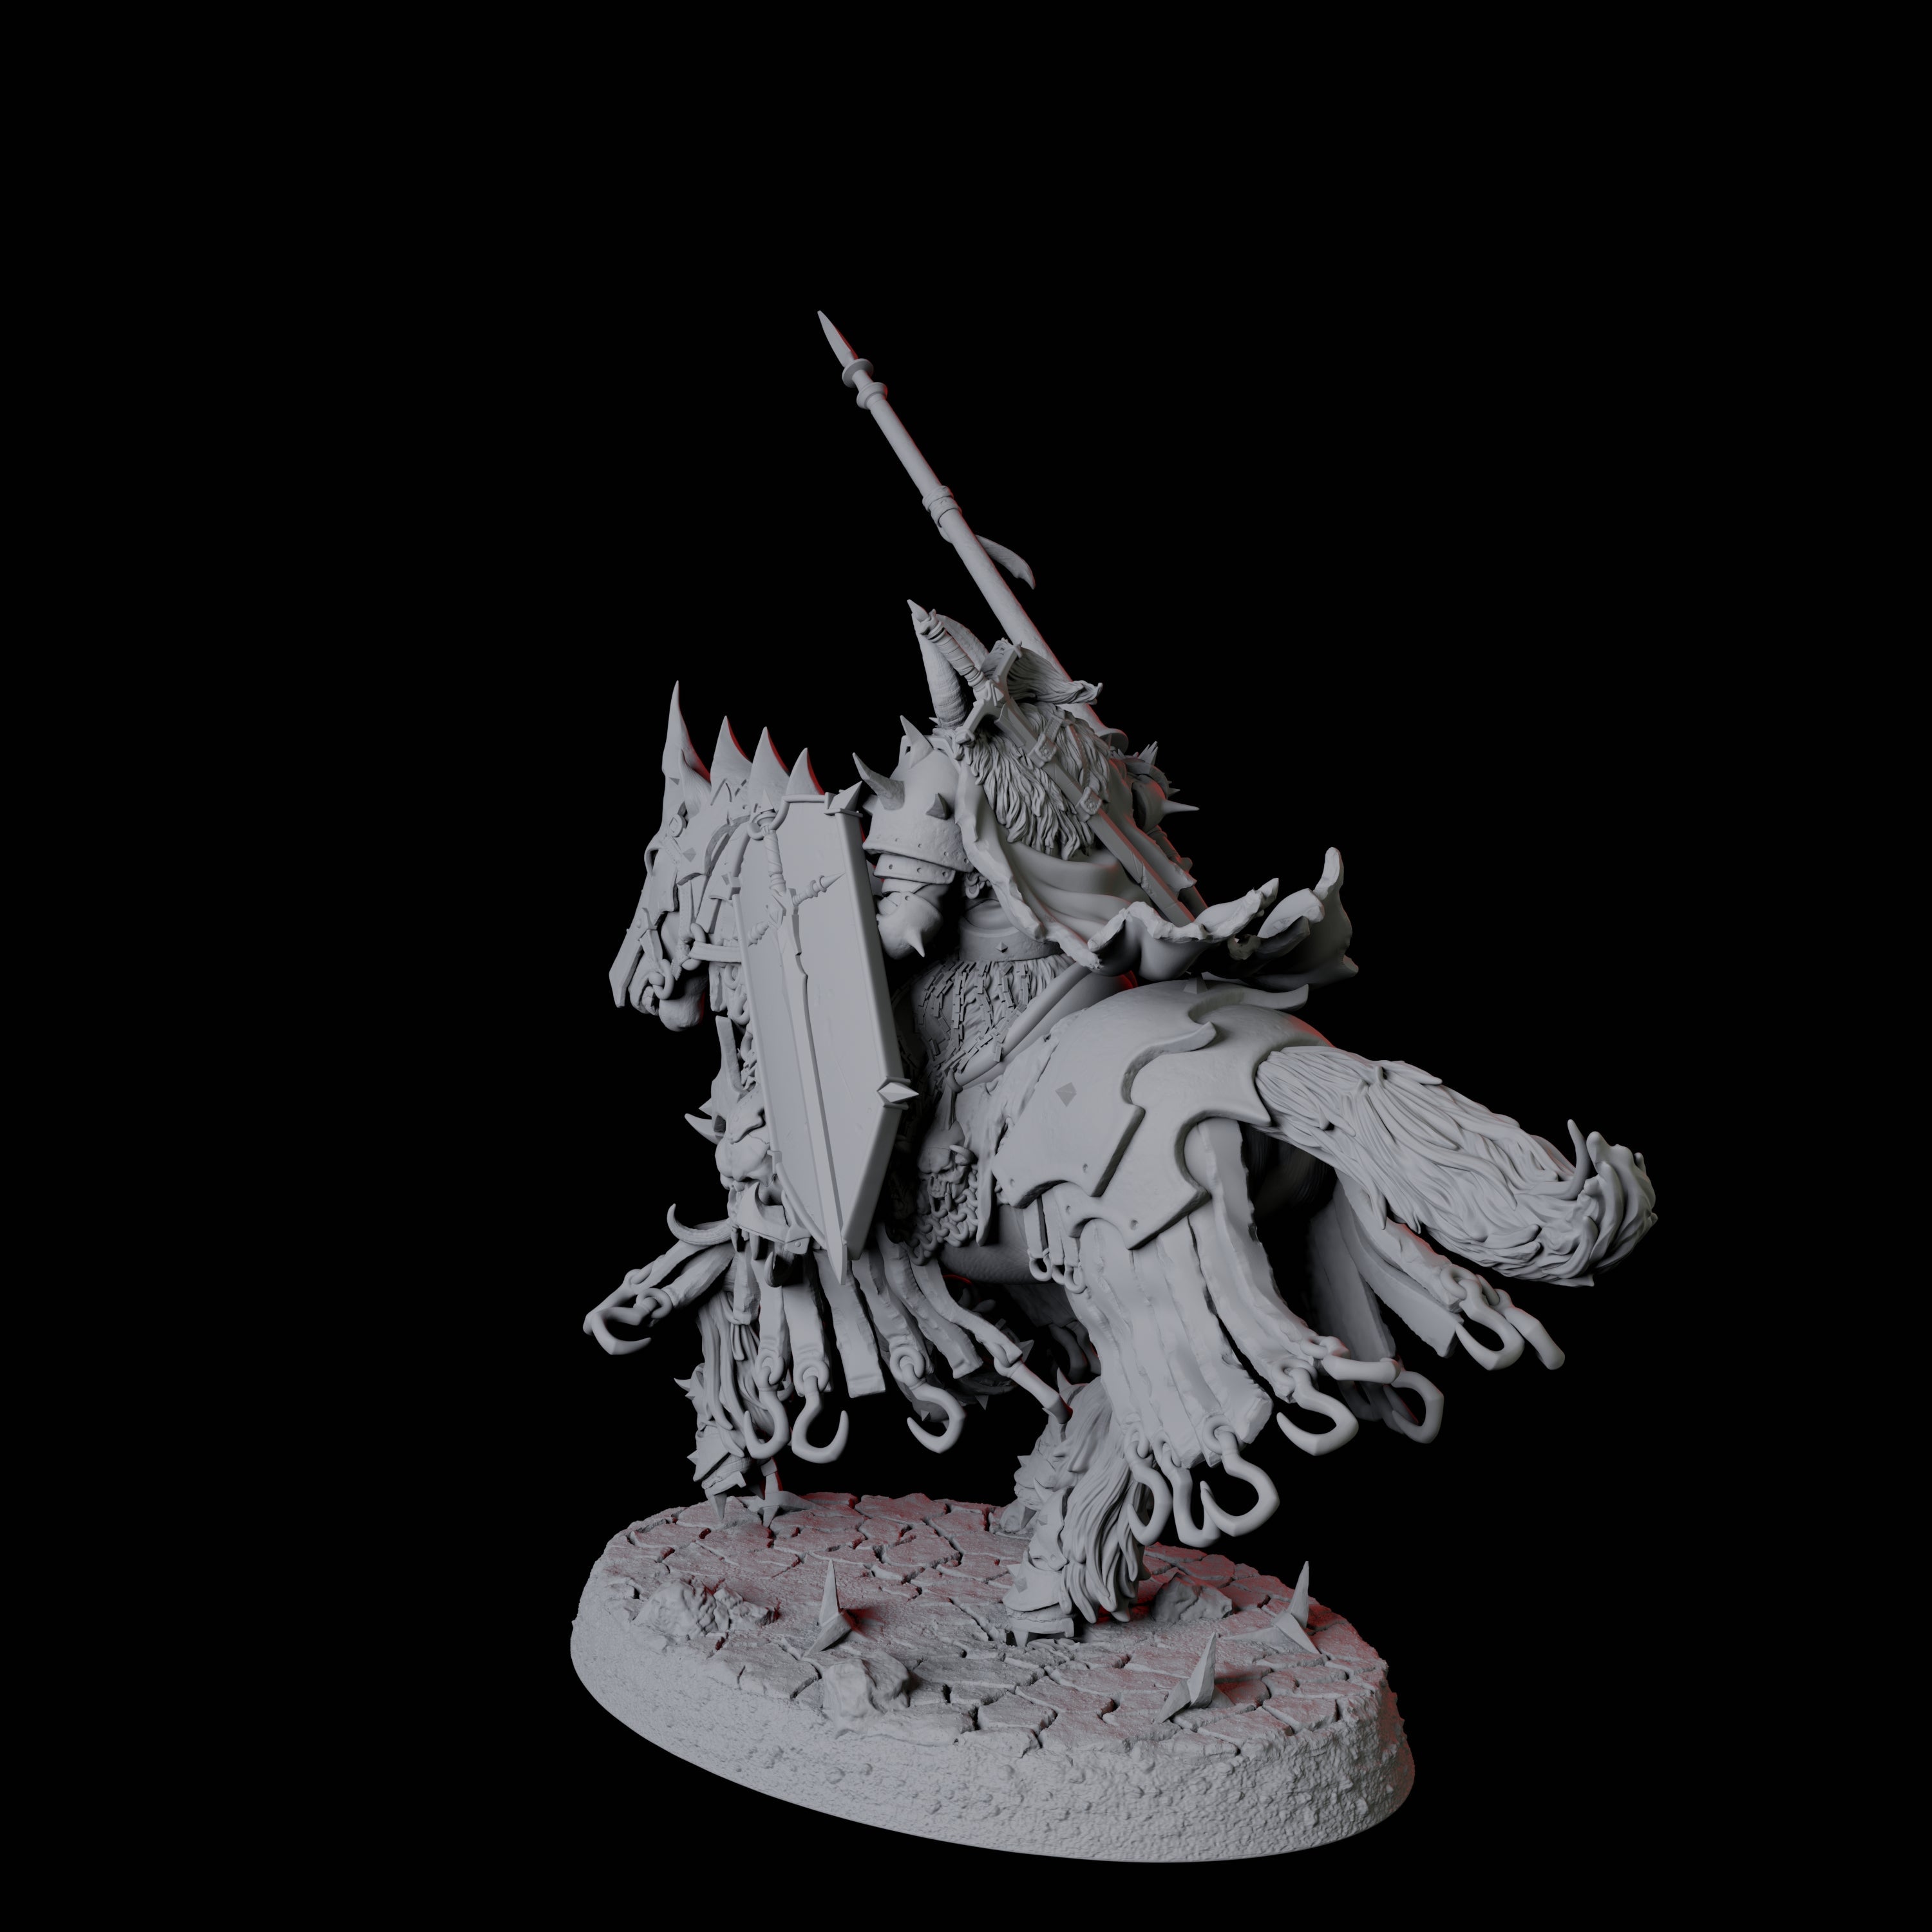 Charging Knight B Miniature for Dungeons and Dragons, Pathfinder or other TTRPGs